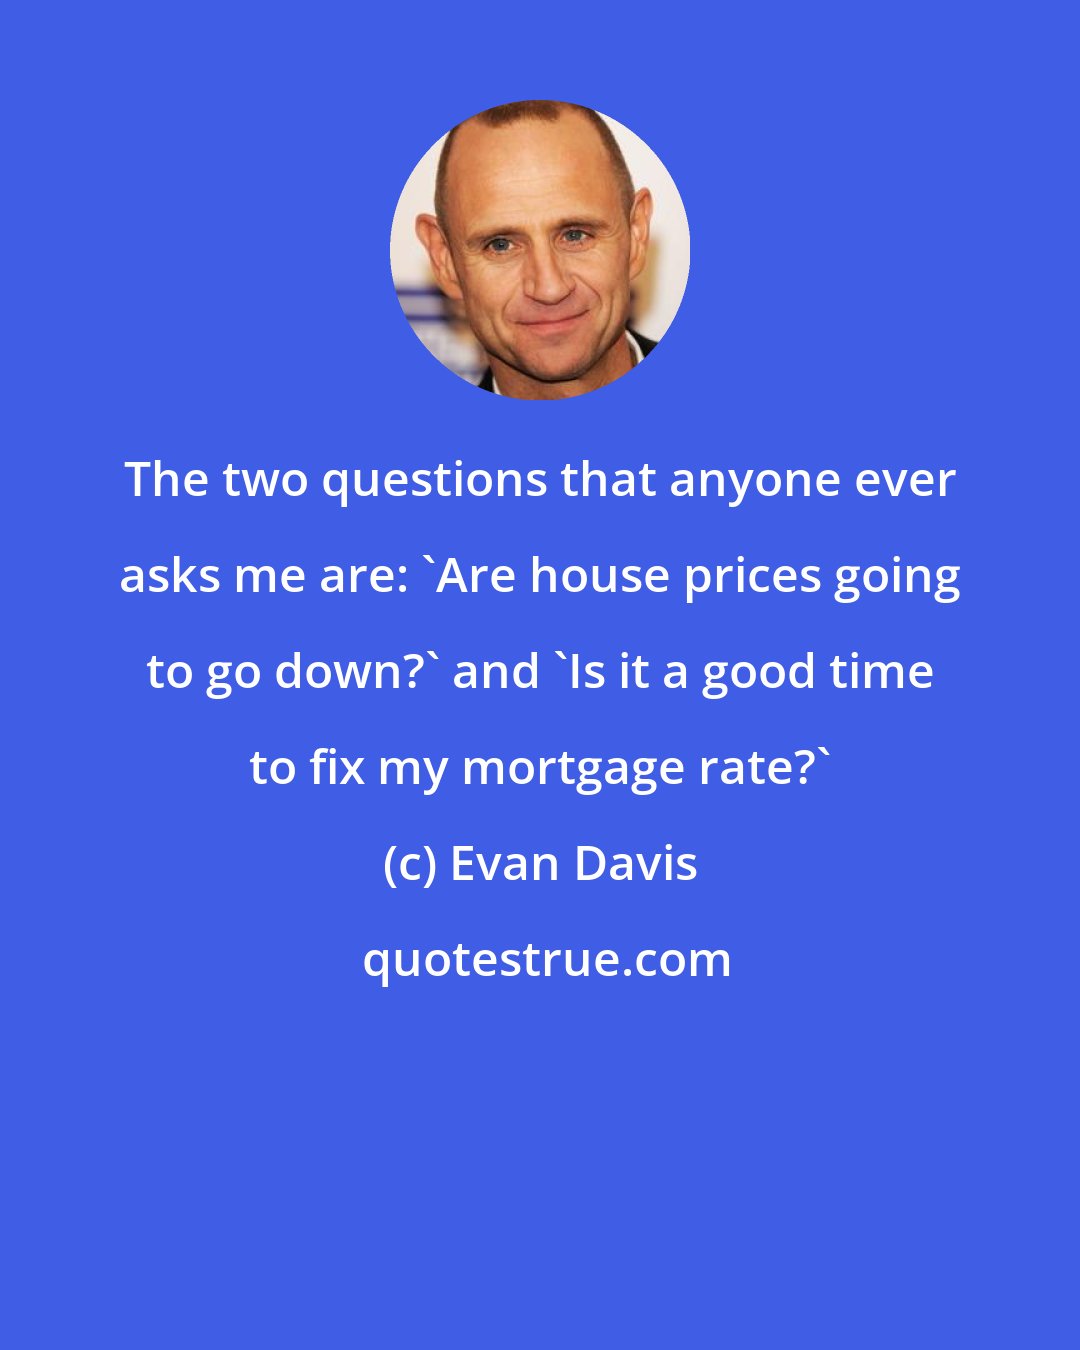 Evan Davis: The two questions that anyone ever asks me are: 'Are house prices going to go down?' and 'Is it a good time to fix my mortgage rate?'